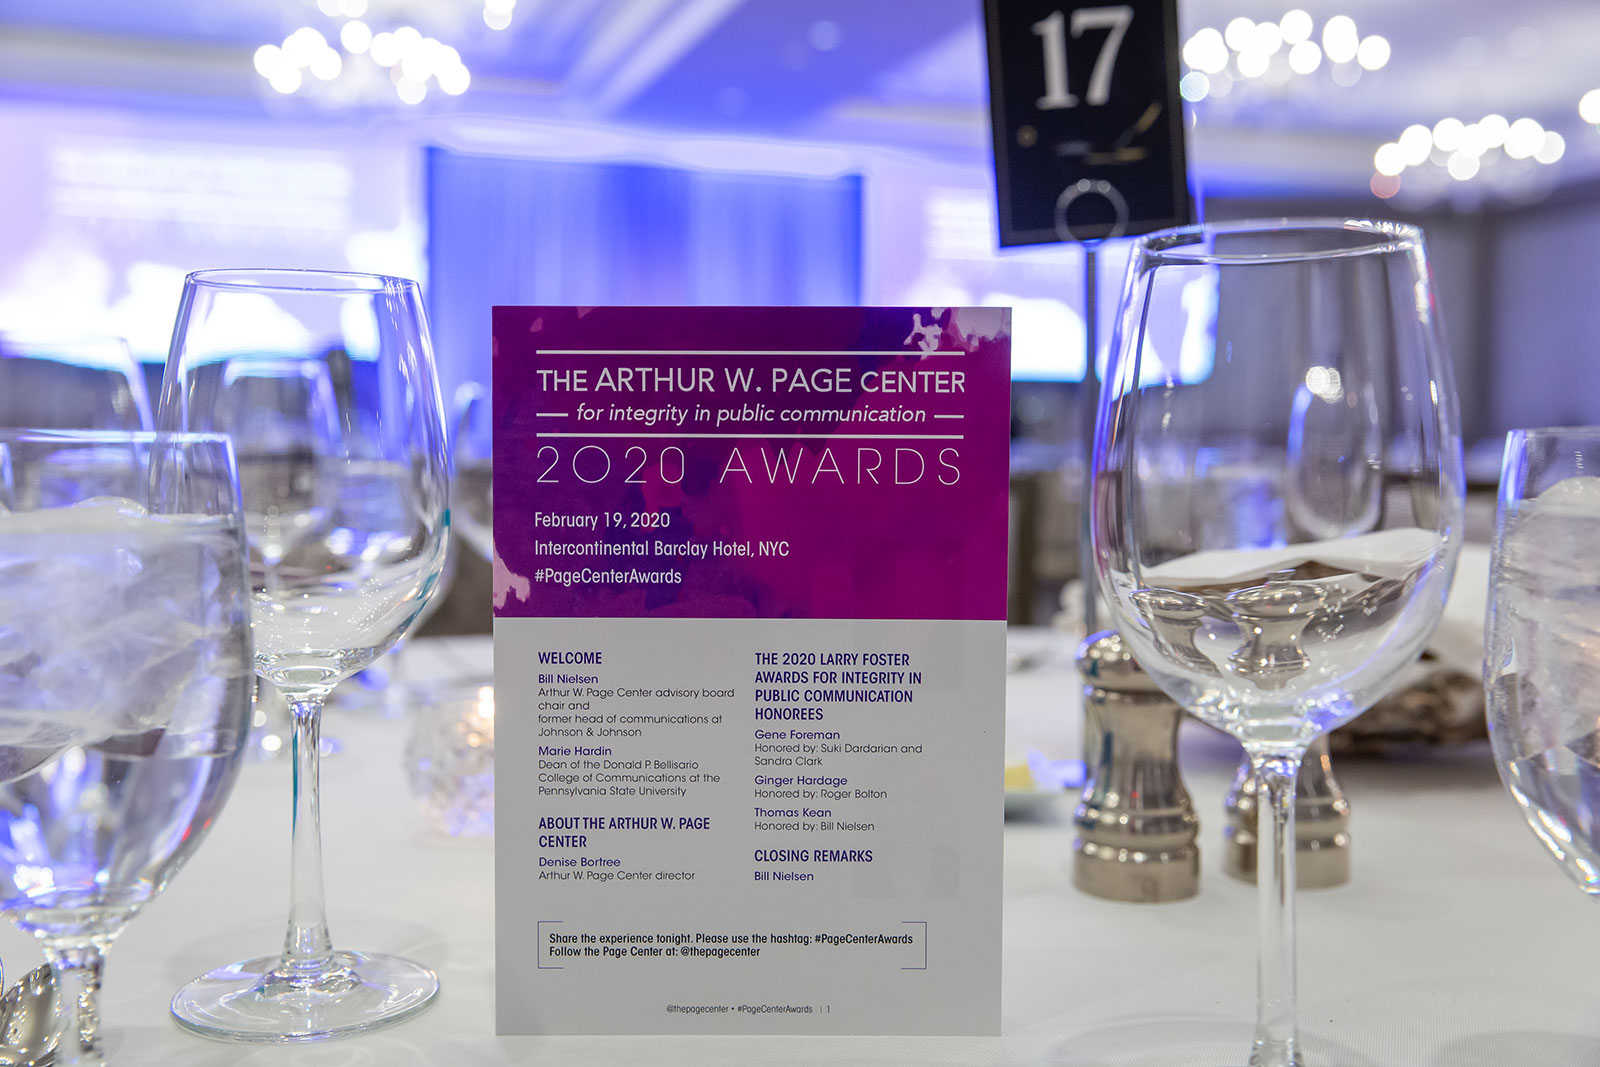  The 2020 Arthur W. Page Center Awards was held at the Intercontinental Barclay Hotel in New York City. 